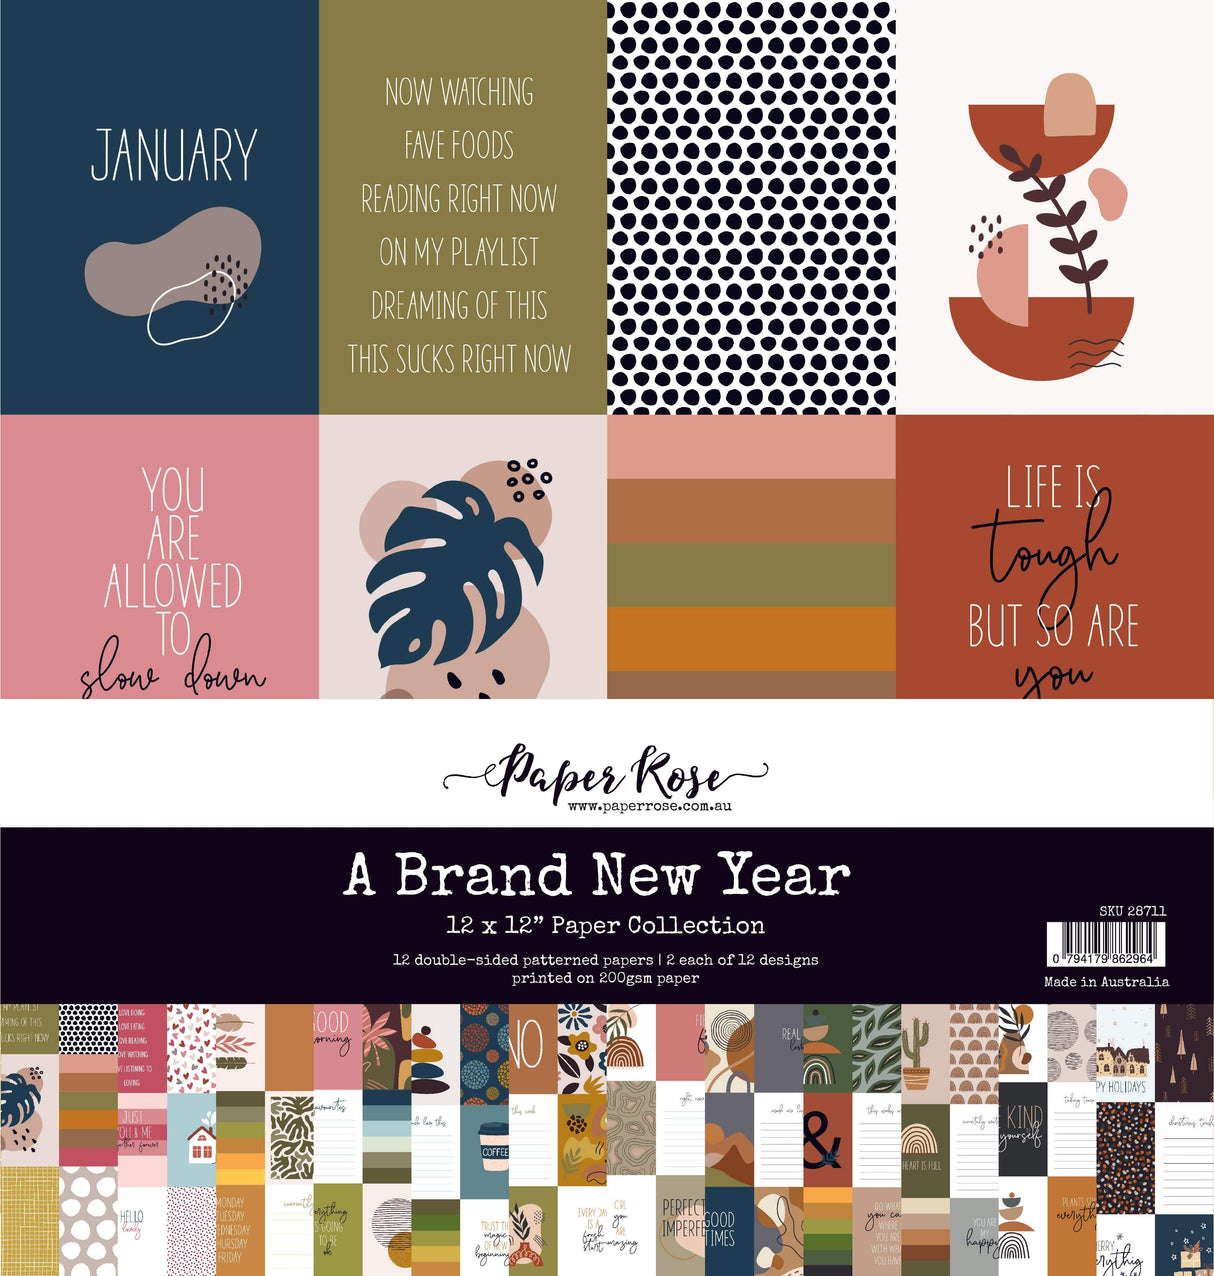 A Brand New Year 12x12 Paper Collection 28711 - Paper Rose Studio